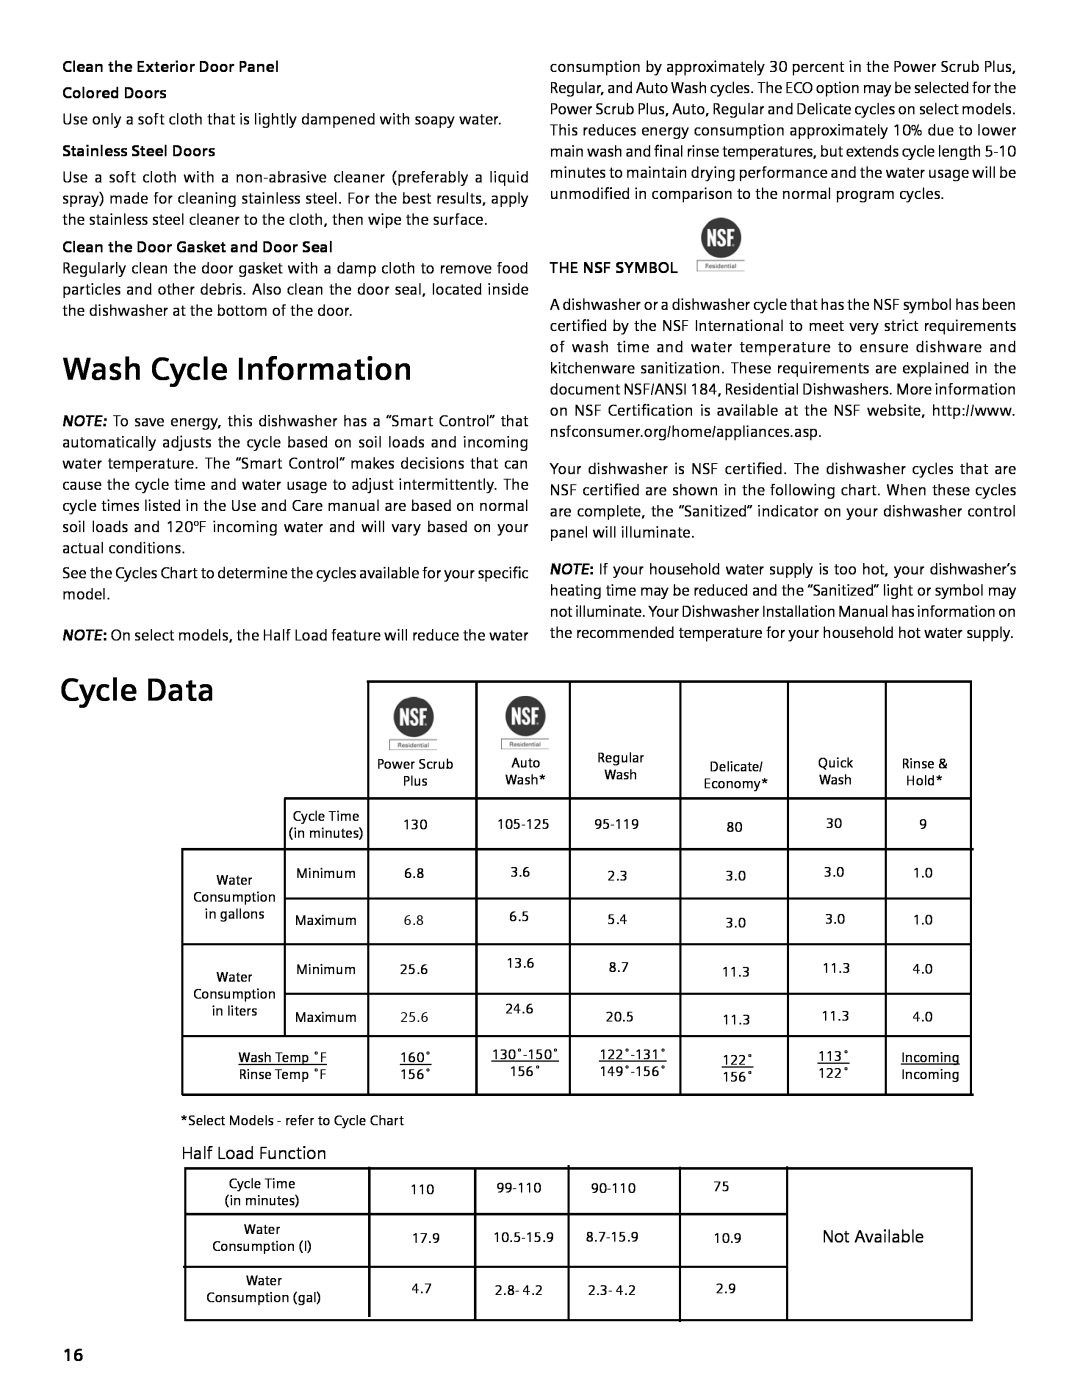 Bosch Appliances SHX3AM Wash Cycle Information, Cycle Data, Clean the Exterior Door Panel Colored Doors, The NSF Symbol 